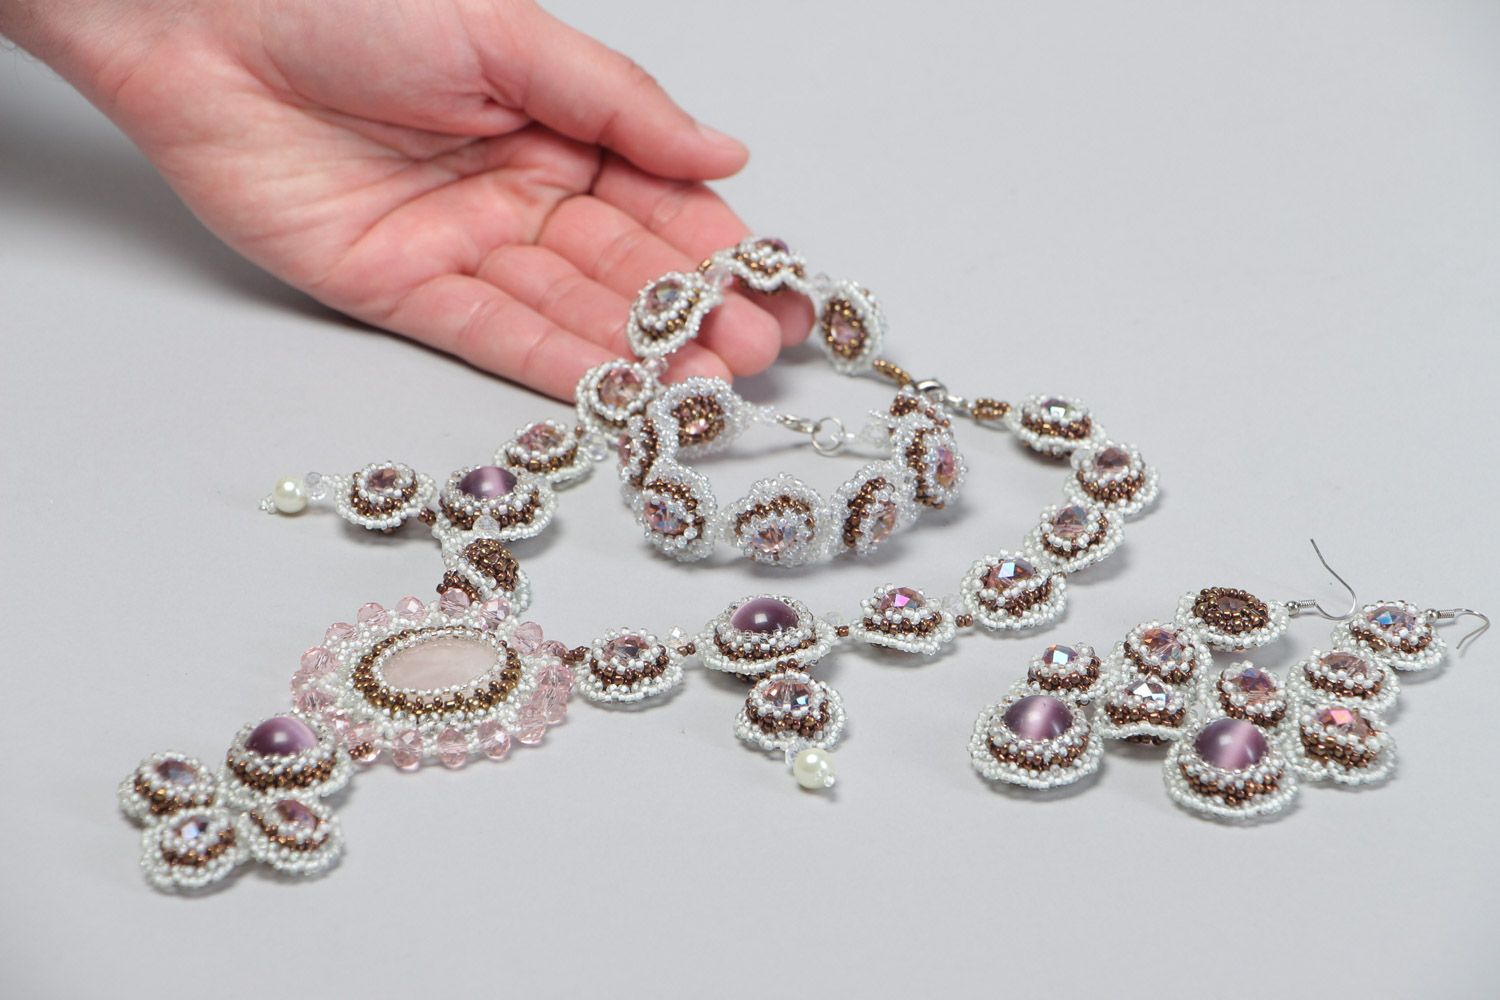 Handmade beaded jewelry set 3 items necklace bracelet and earrings with natural stones photo 5